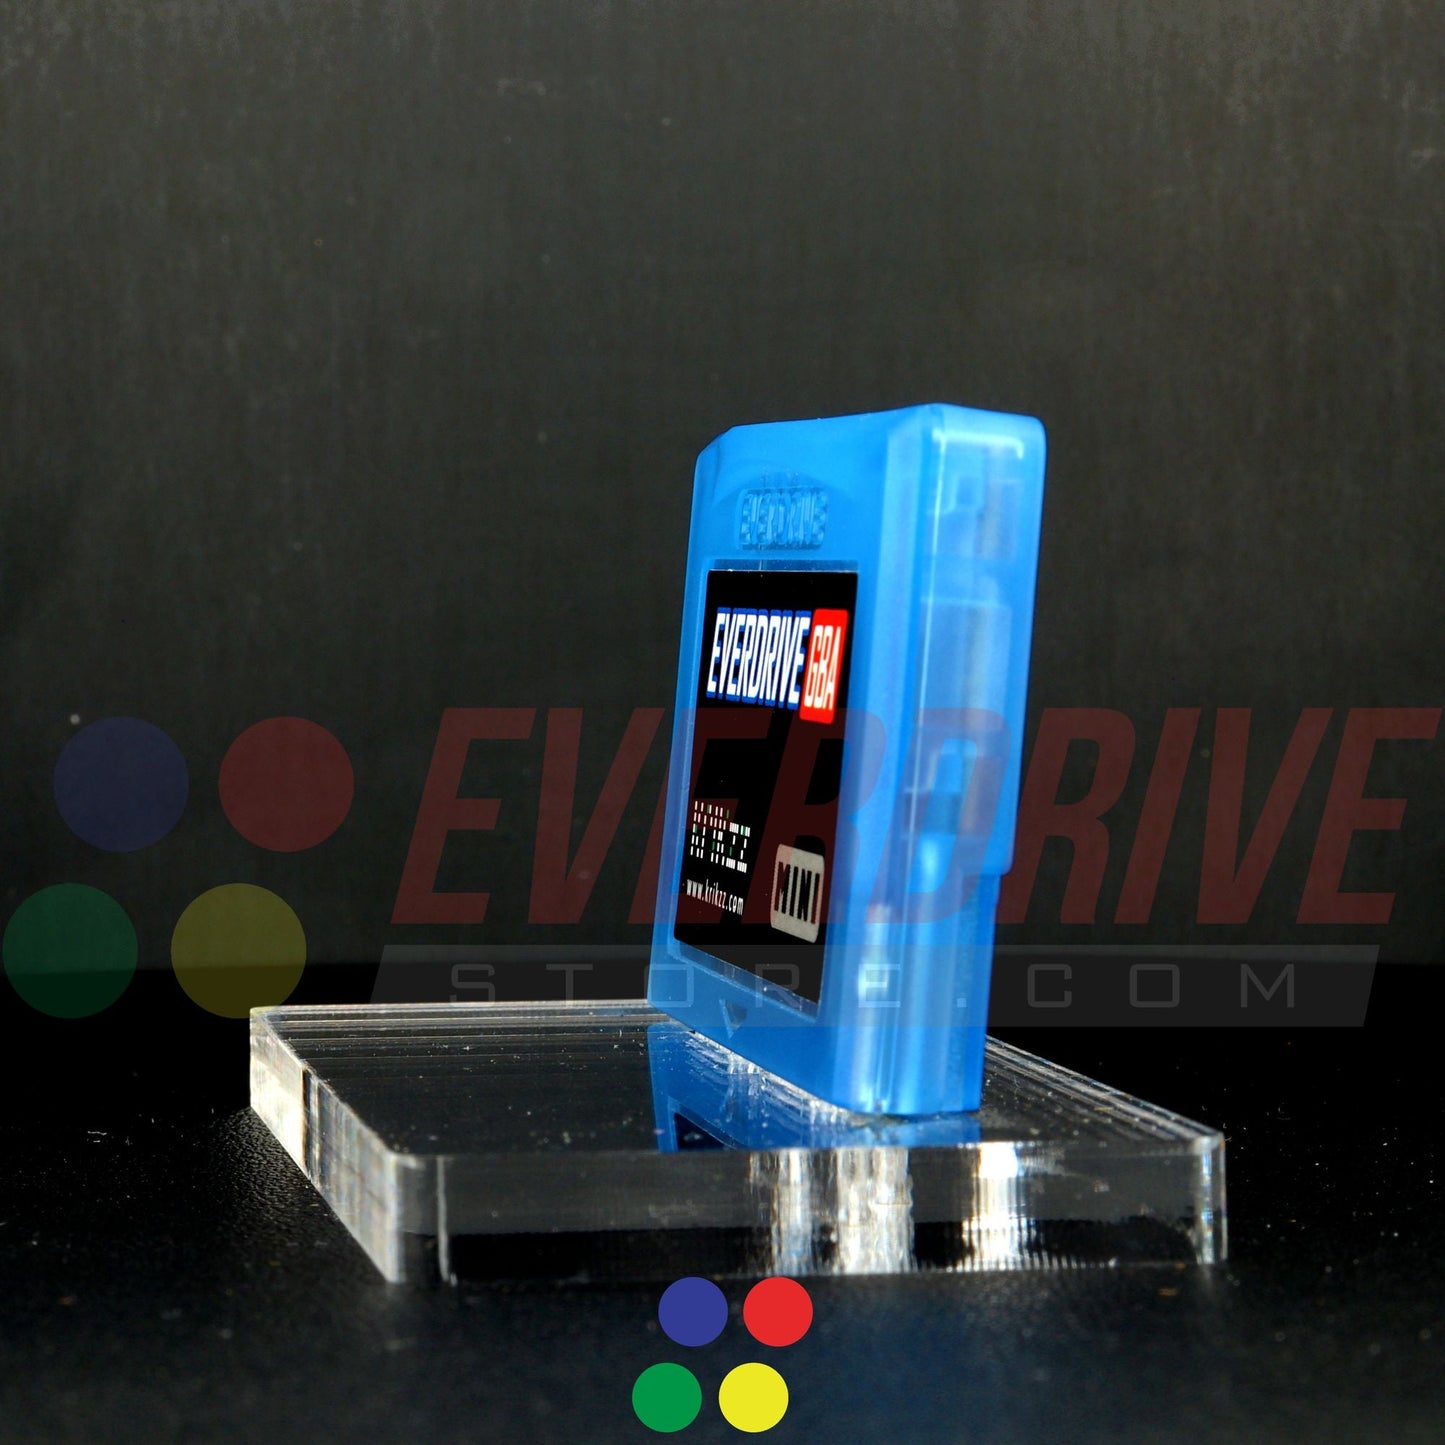 Everdrive GBA Mini - Frosted Blue